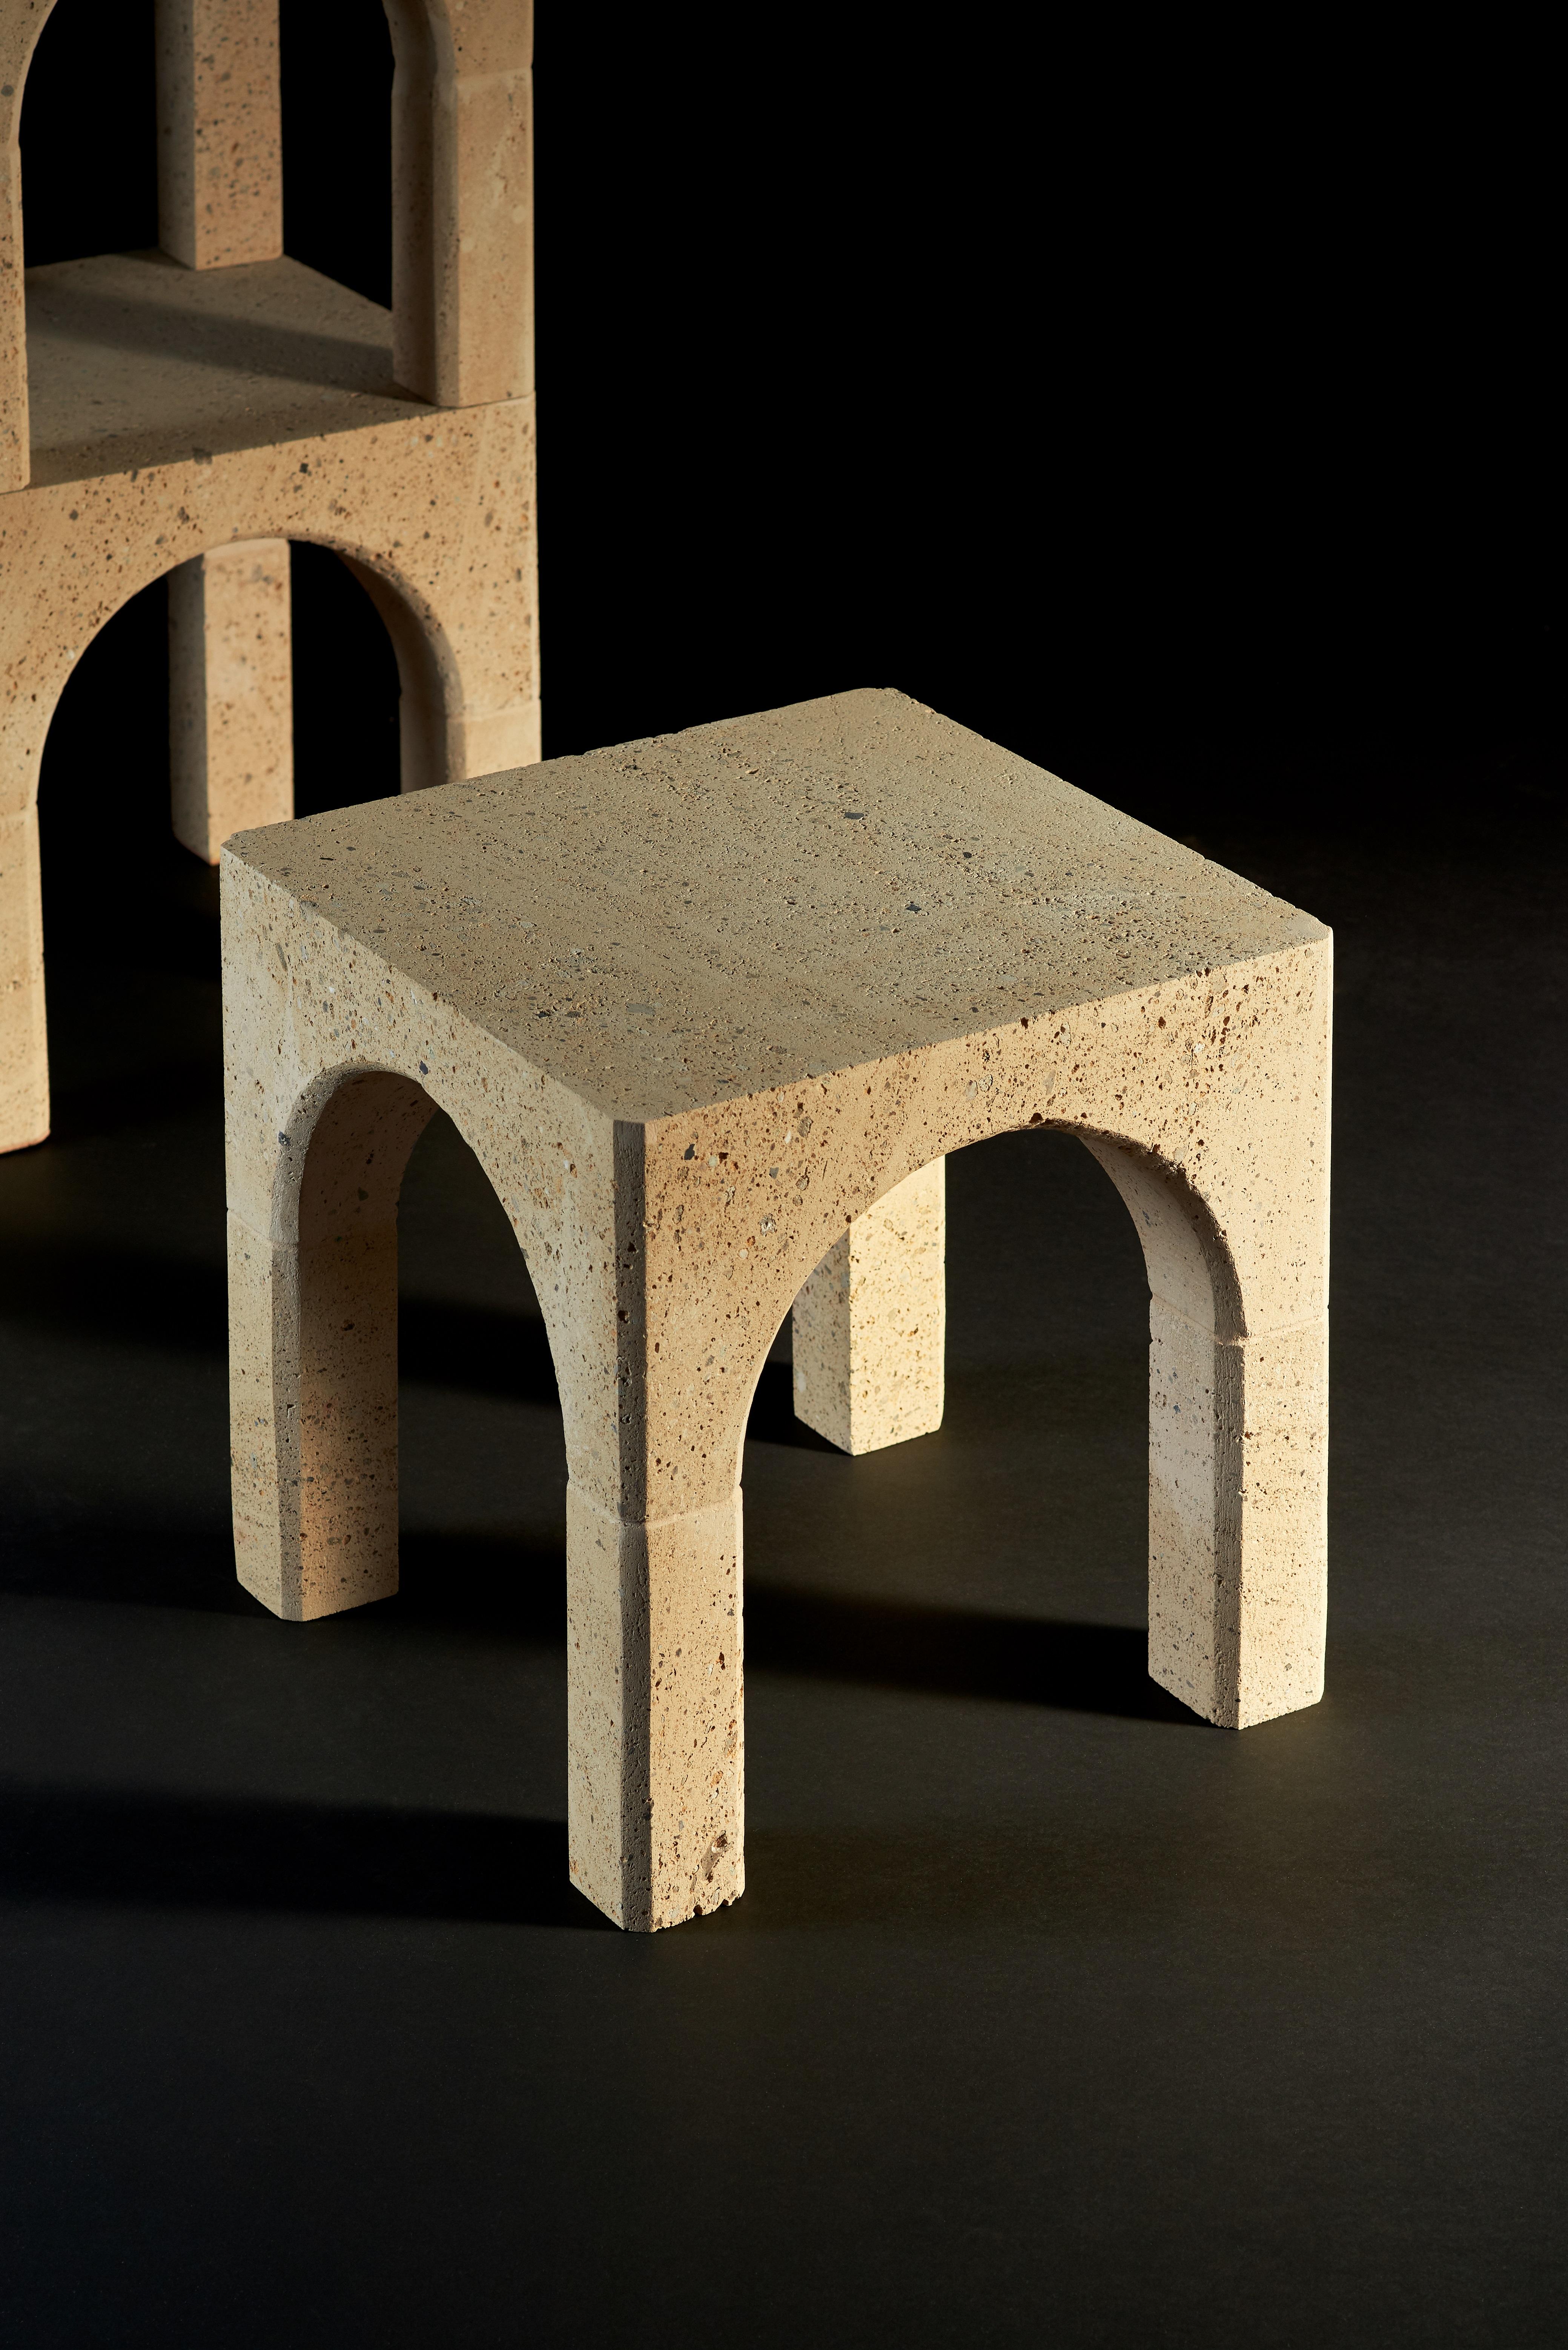 Mono Coffee Table by Corradino Garofalo
Limited Edition of 9 + 1 a.p.
Dimensions: D 42 x W 42 x H 42 cm
Material: Stone.

Partenopea is a collection of six objects that materialise the profound connection between an ignimbrite rock and a city